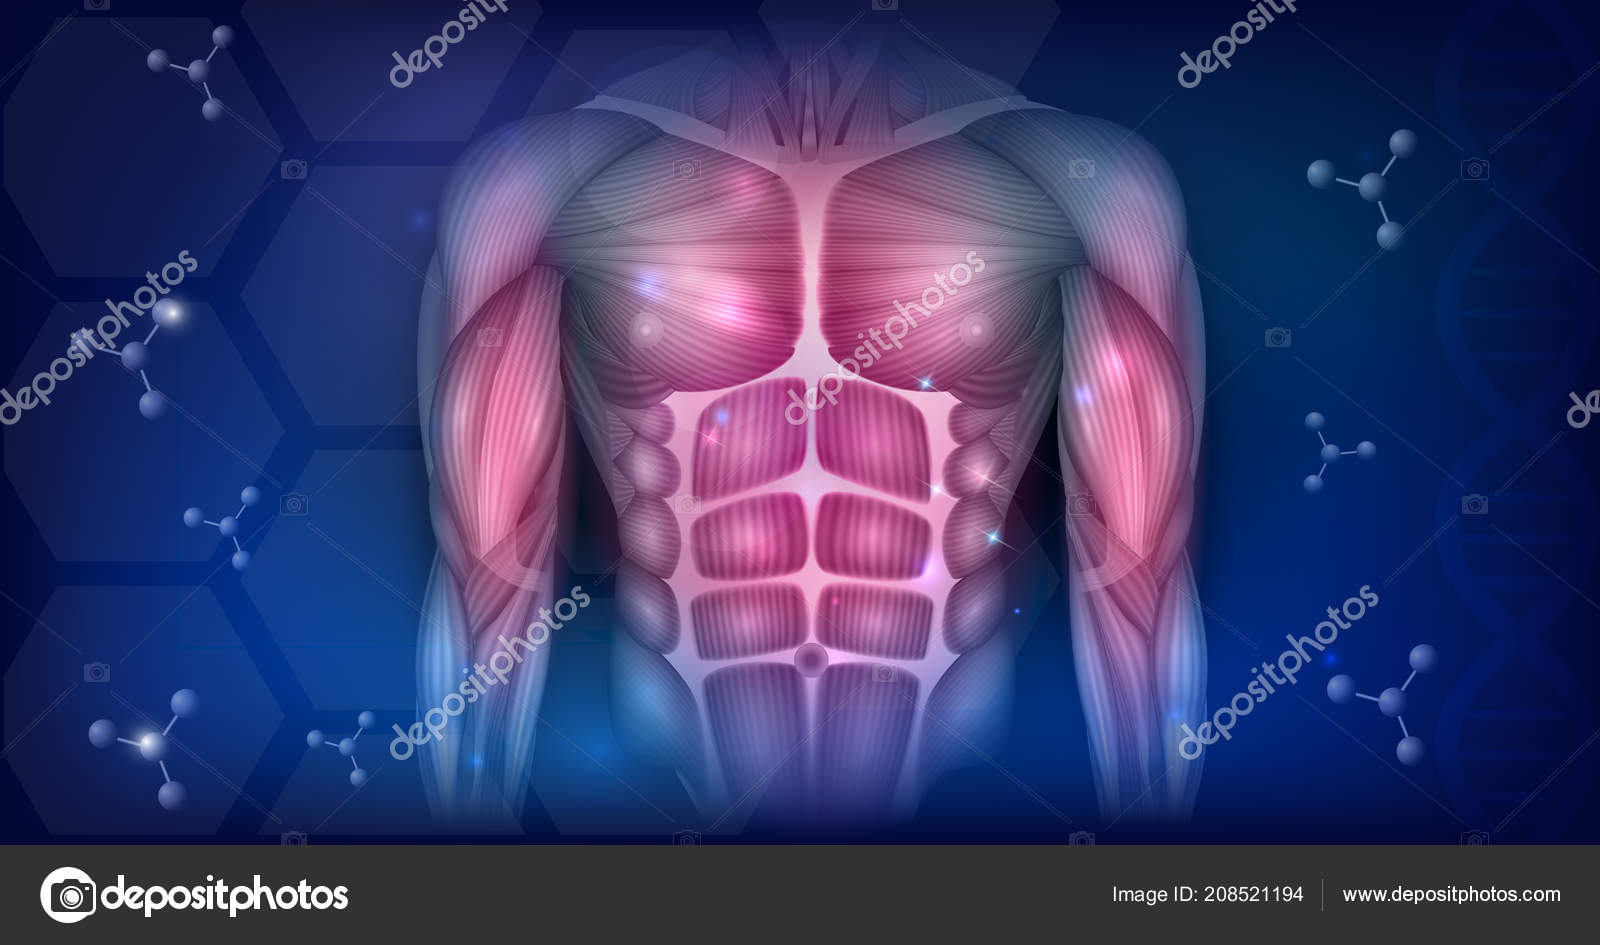 Muscles Human Body Torso Arms Beautiful Colorful Illustration Abstract Blue Stock Vector C Megija 208521194